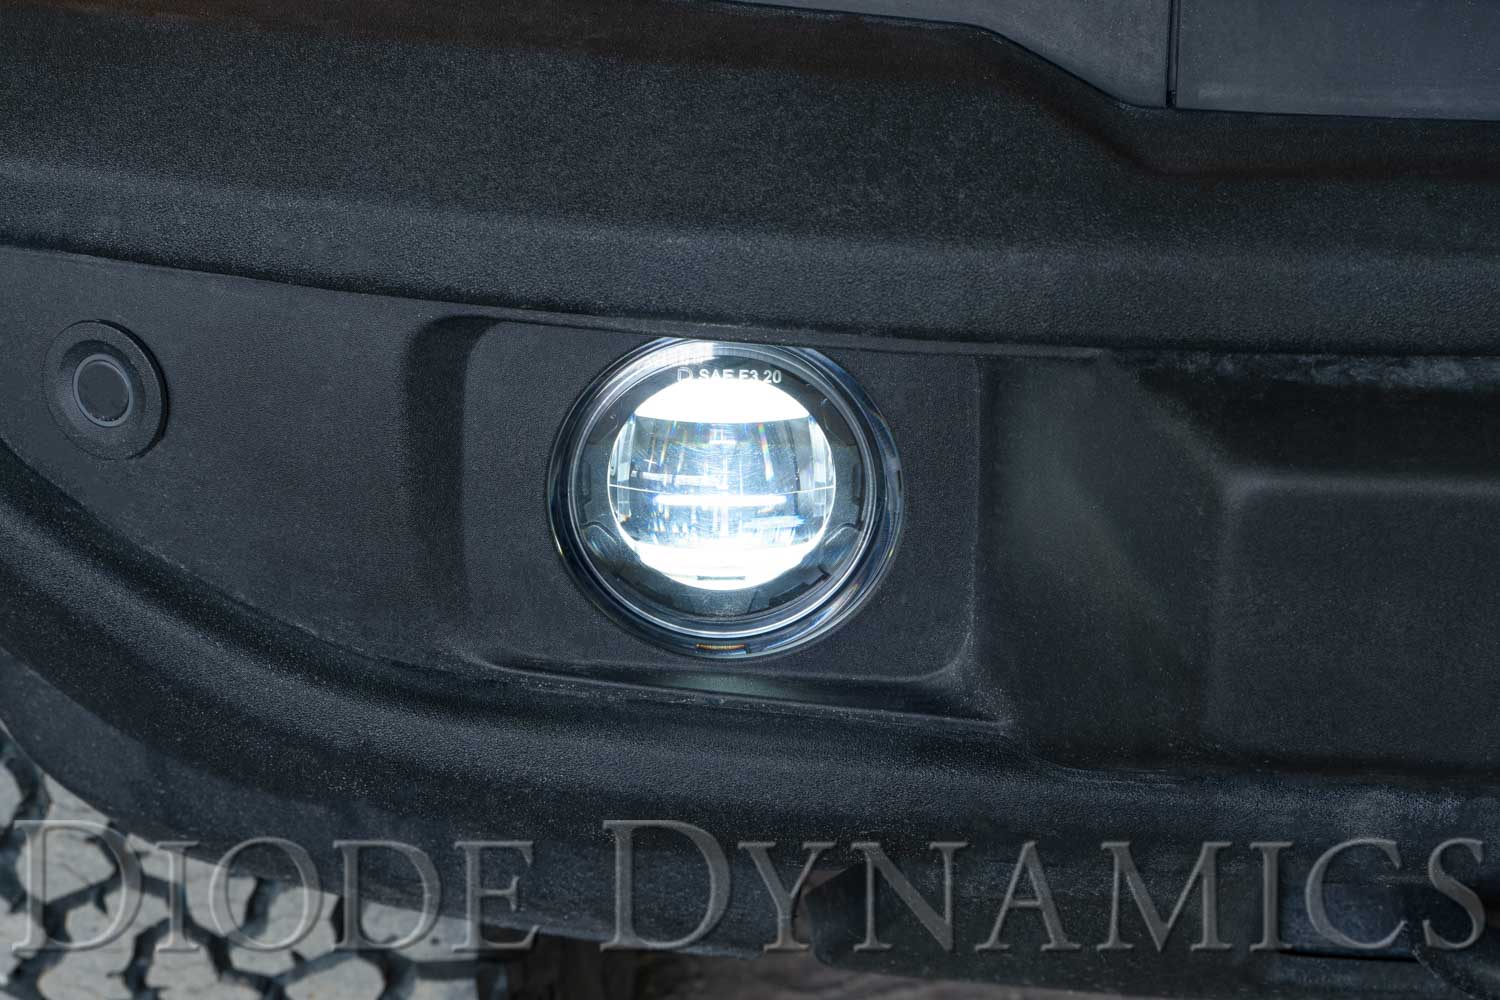 Elite Series Fog Lamps for 2014-2022 Subaru Forester Pair Cool White 6000K Diode Dynamics